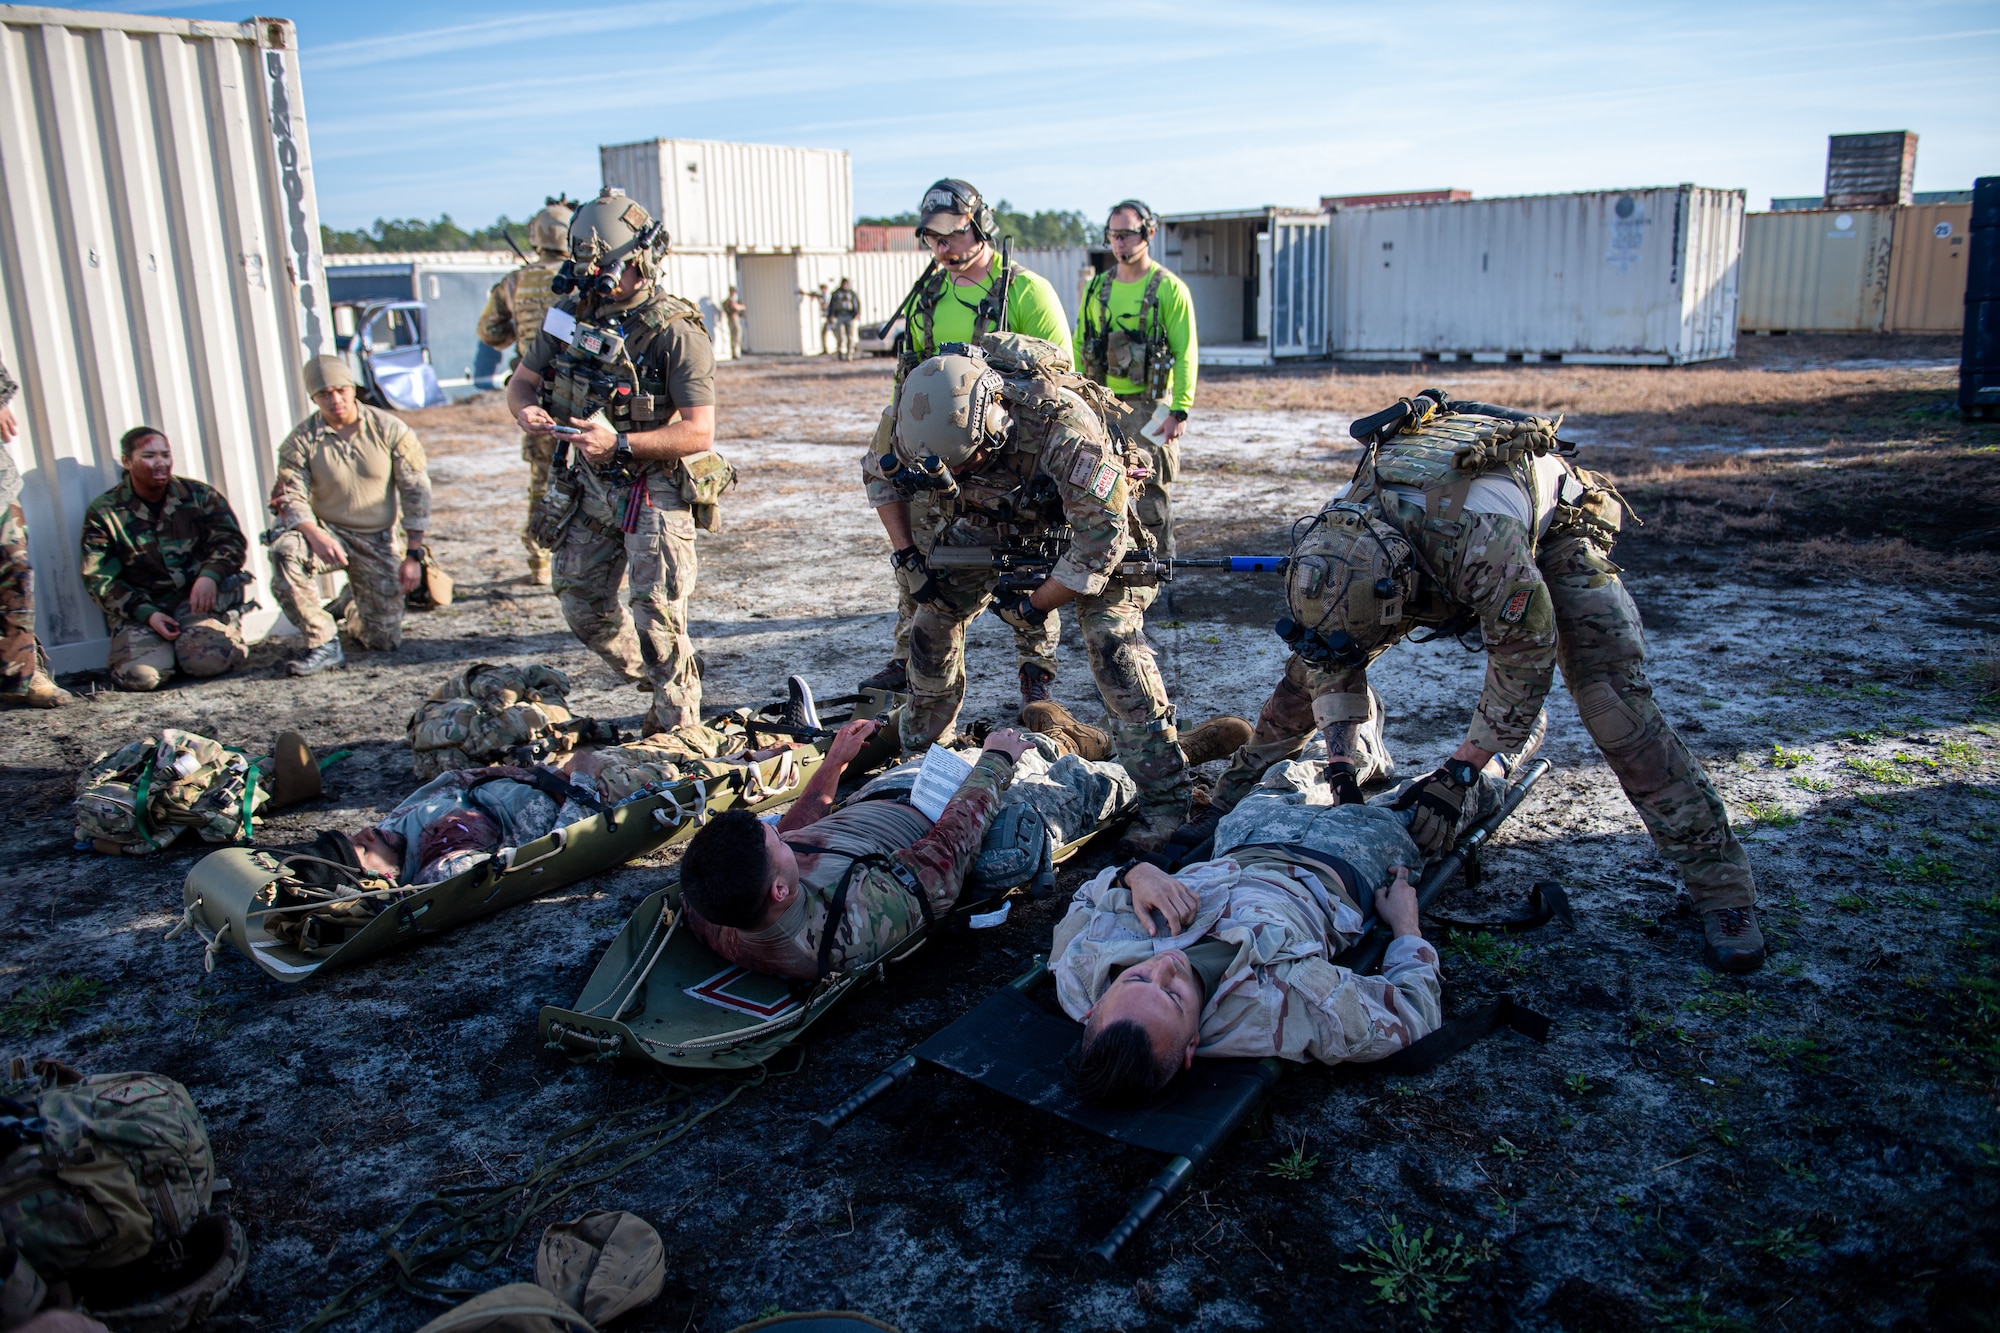 A photo of Airmen helping simulated injured patients.